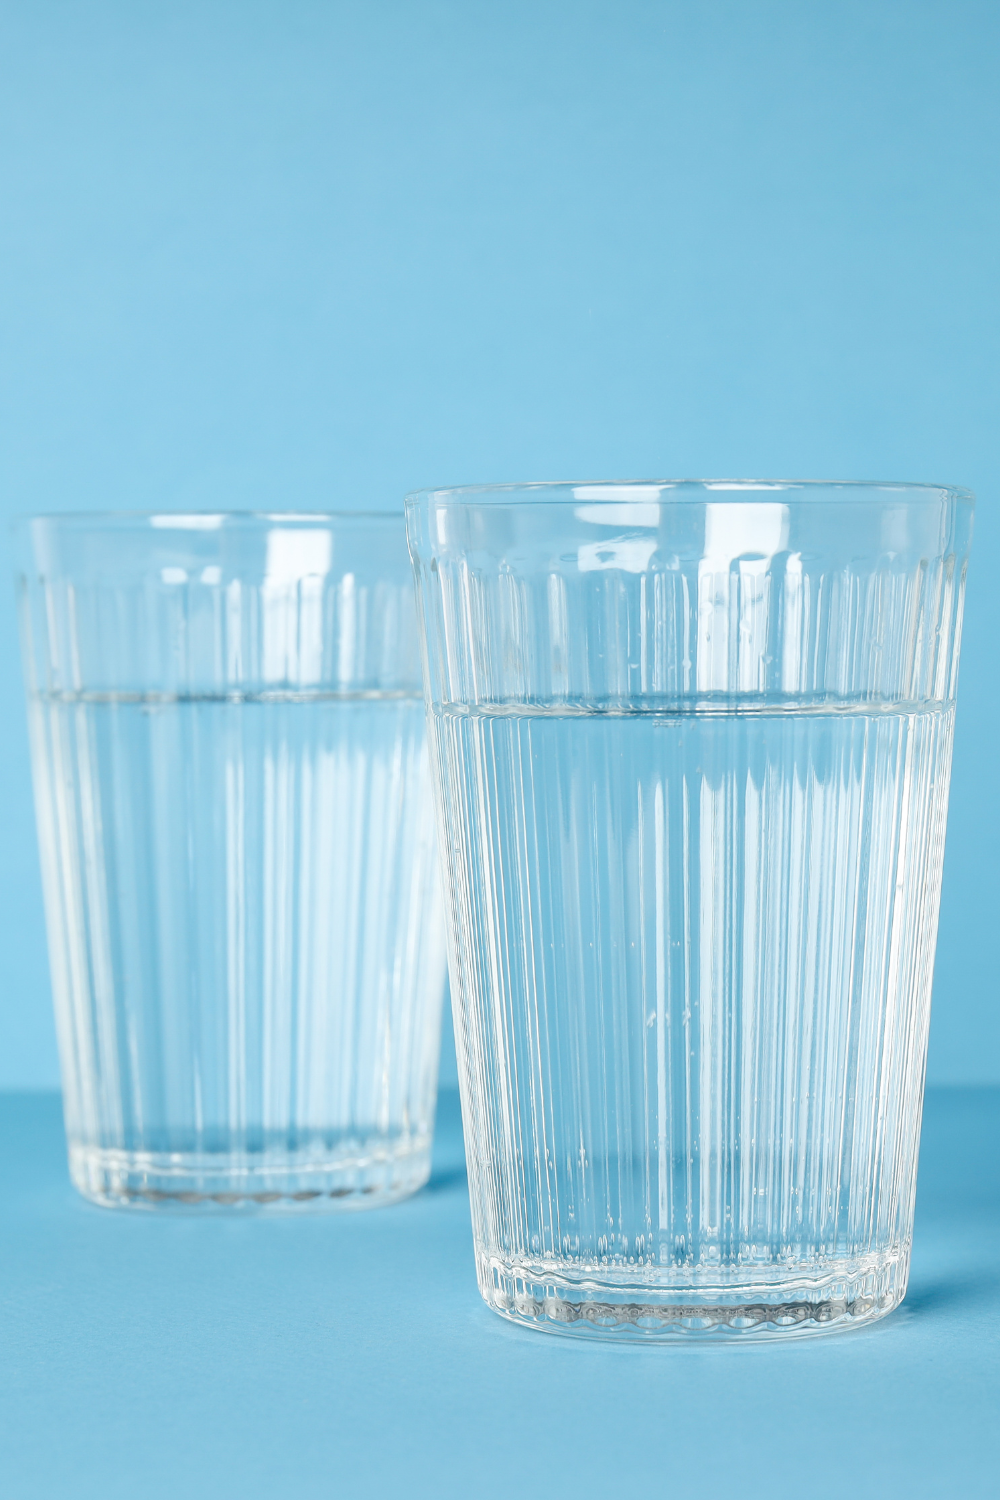 two glassed of water on a blue background